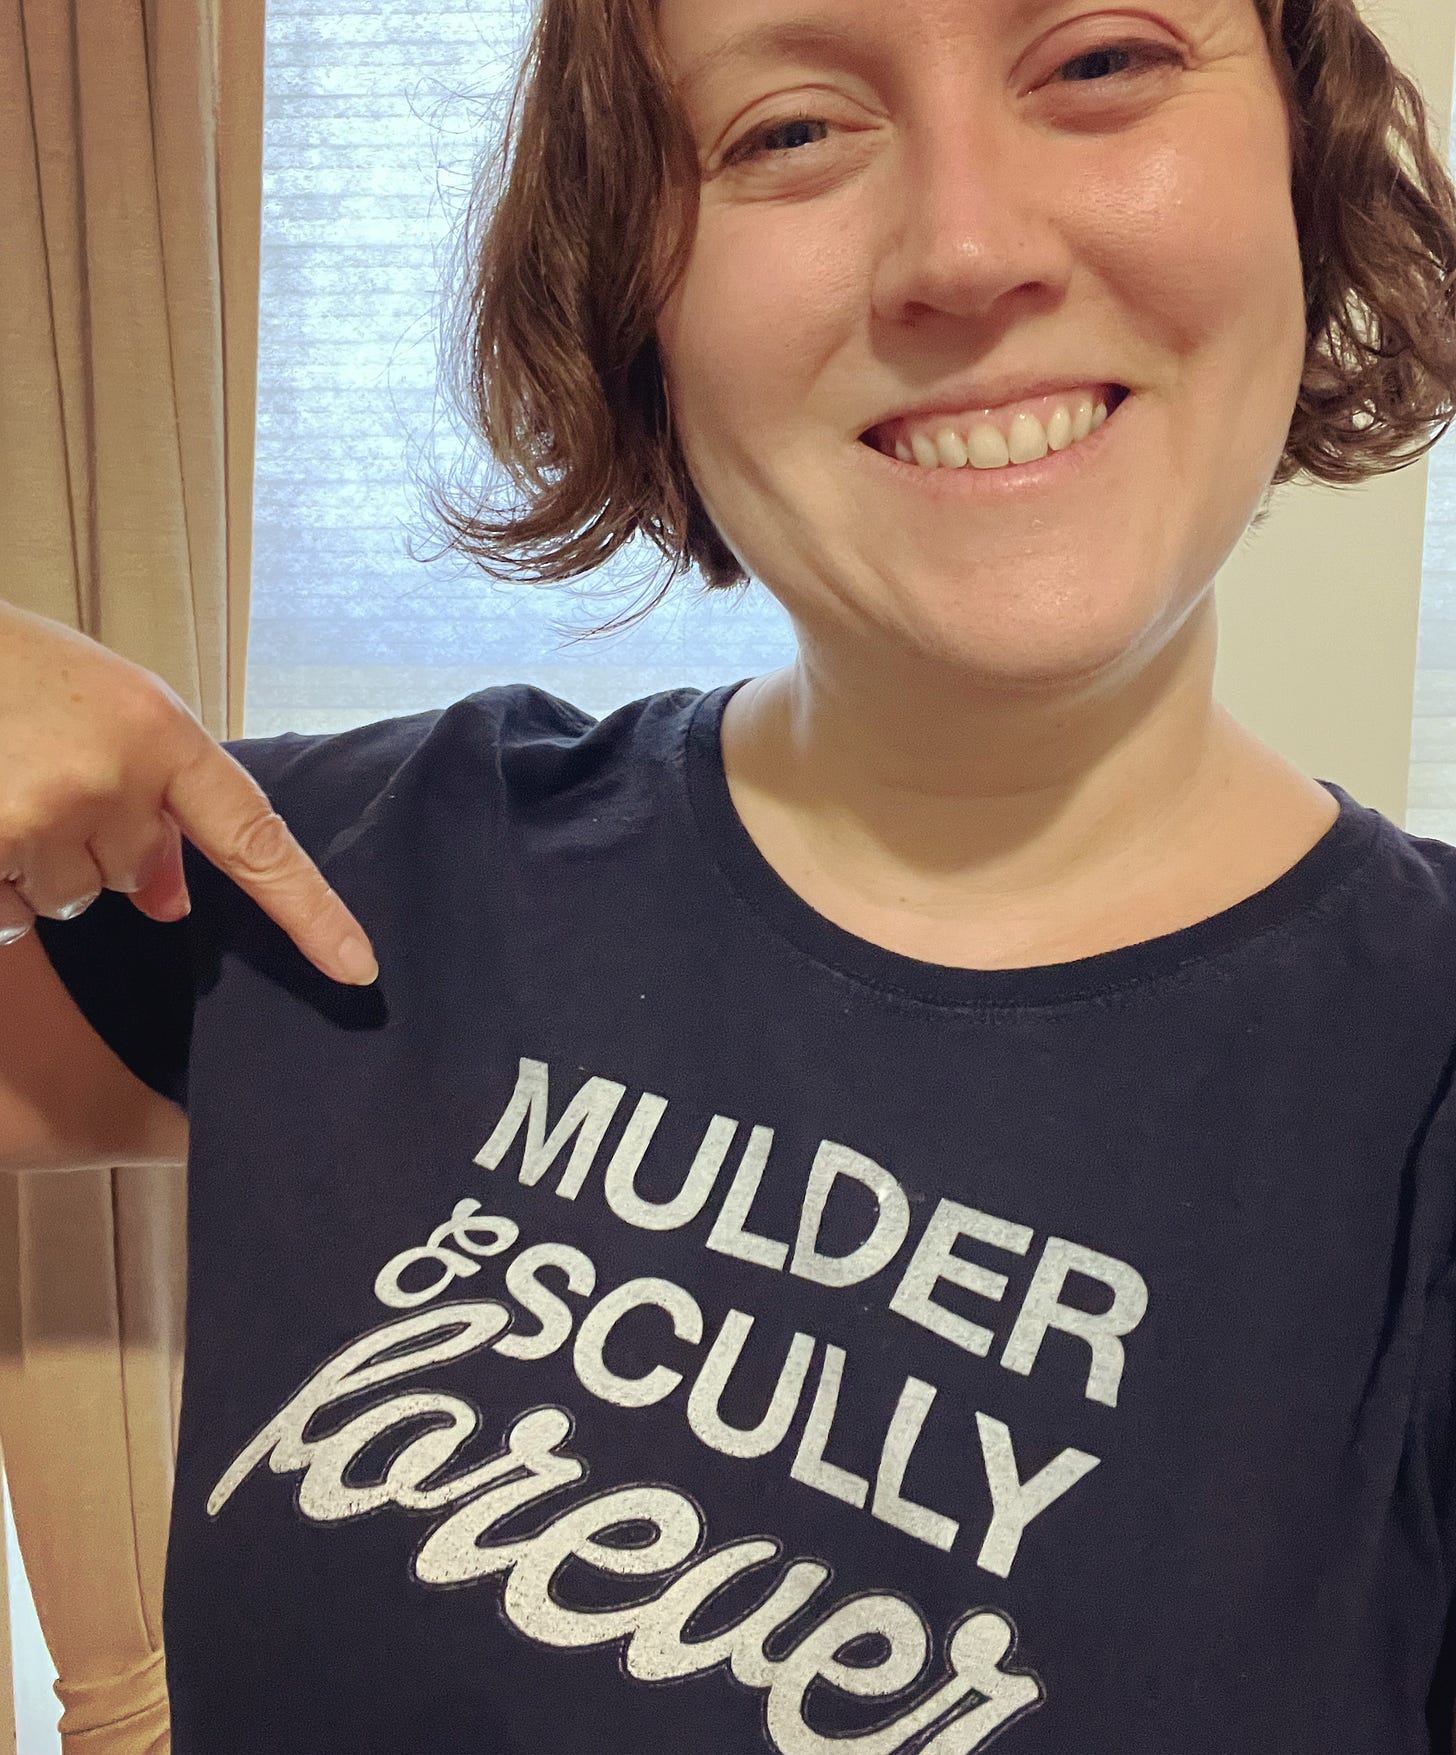 Me wearing a shirt that says "Mulder & Scully forever"